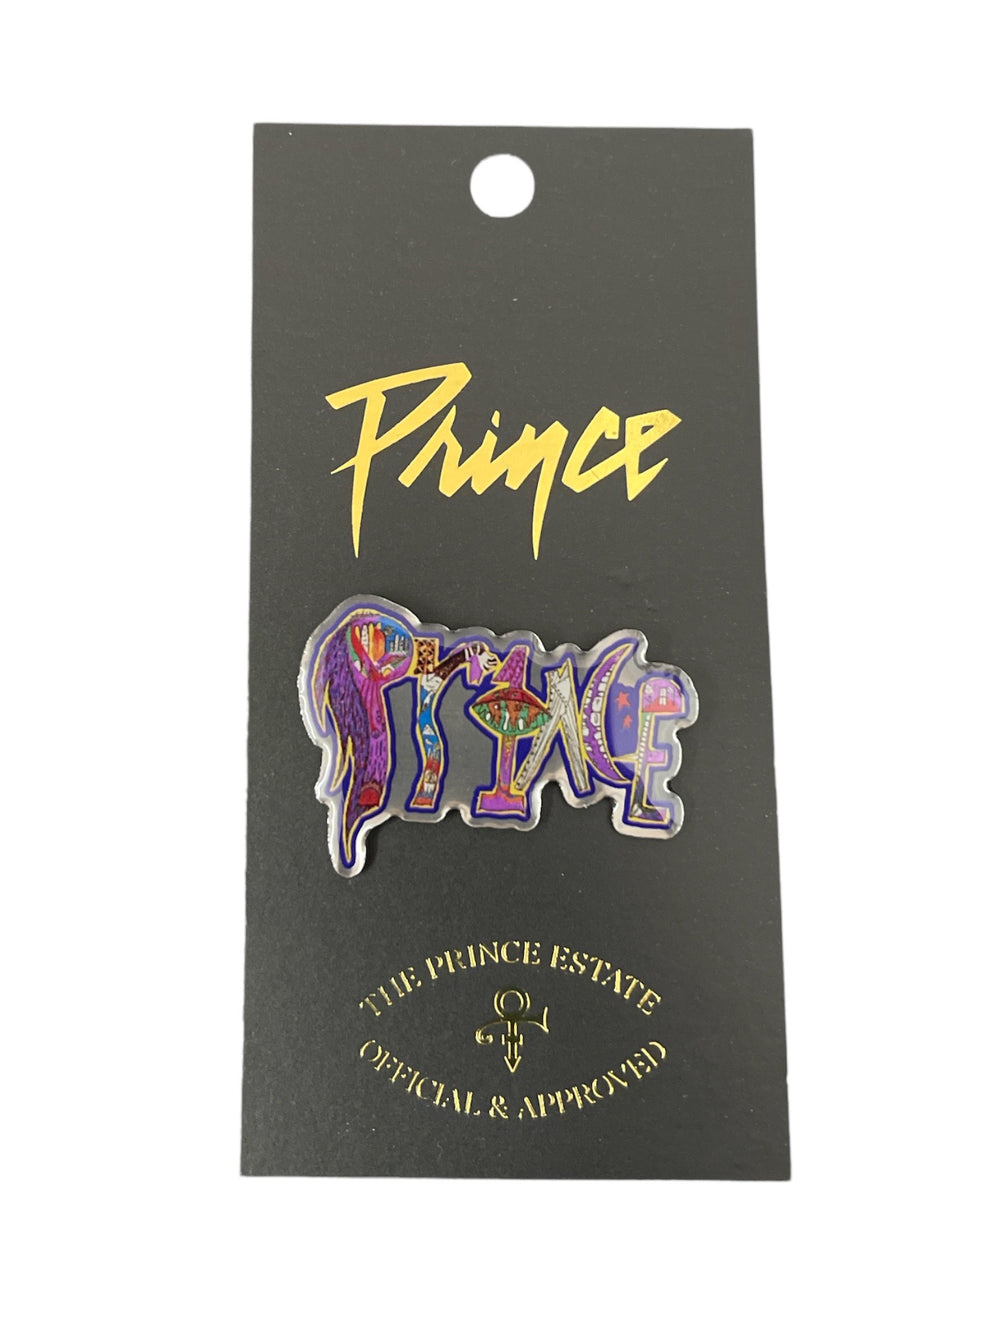 Prince – Paisley Park Official Acrylic Pin Badge Brand New 1999